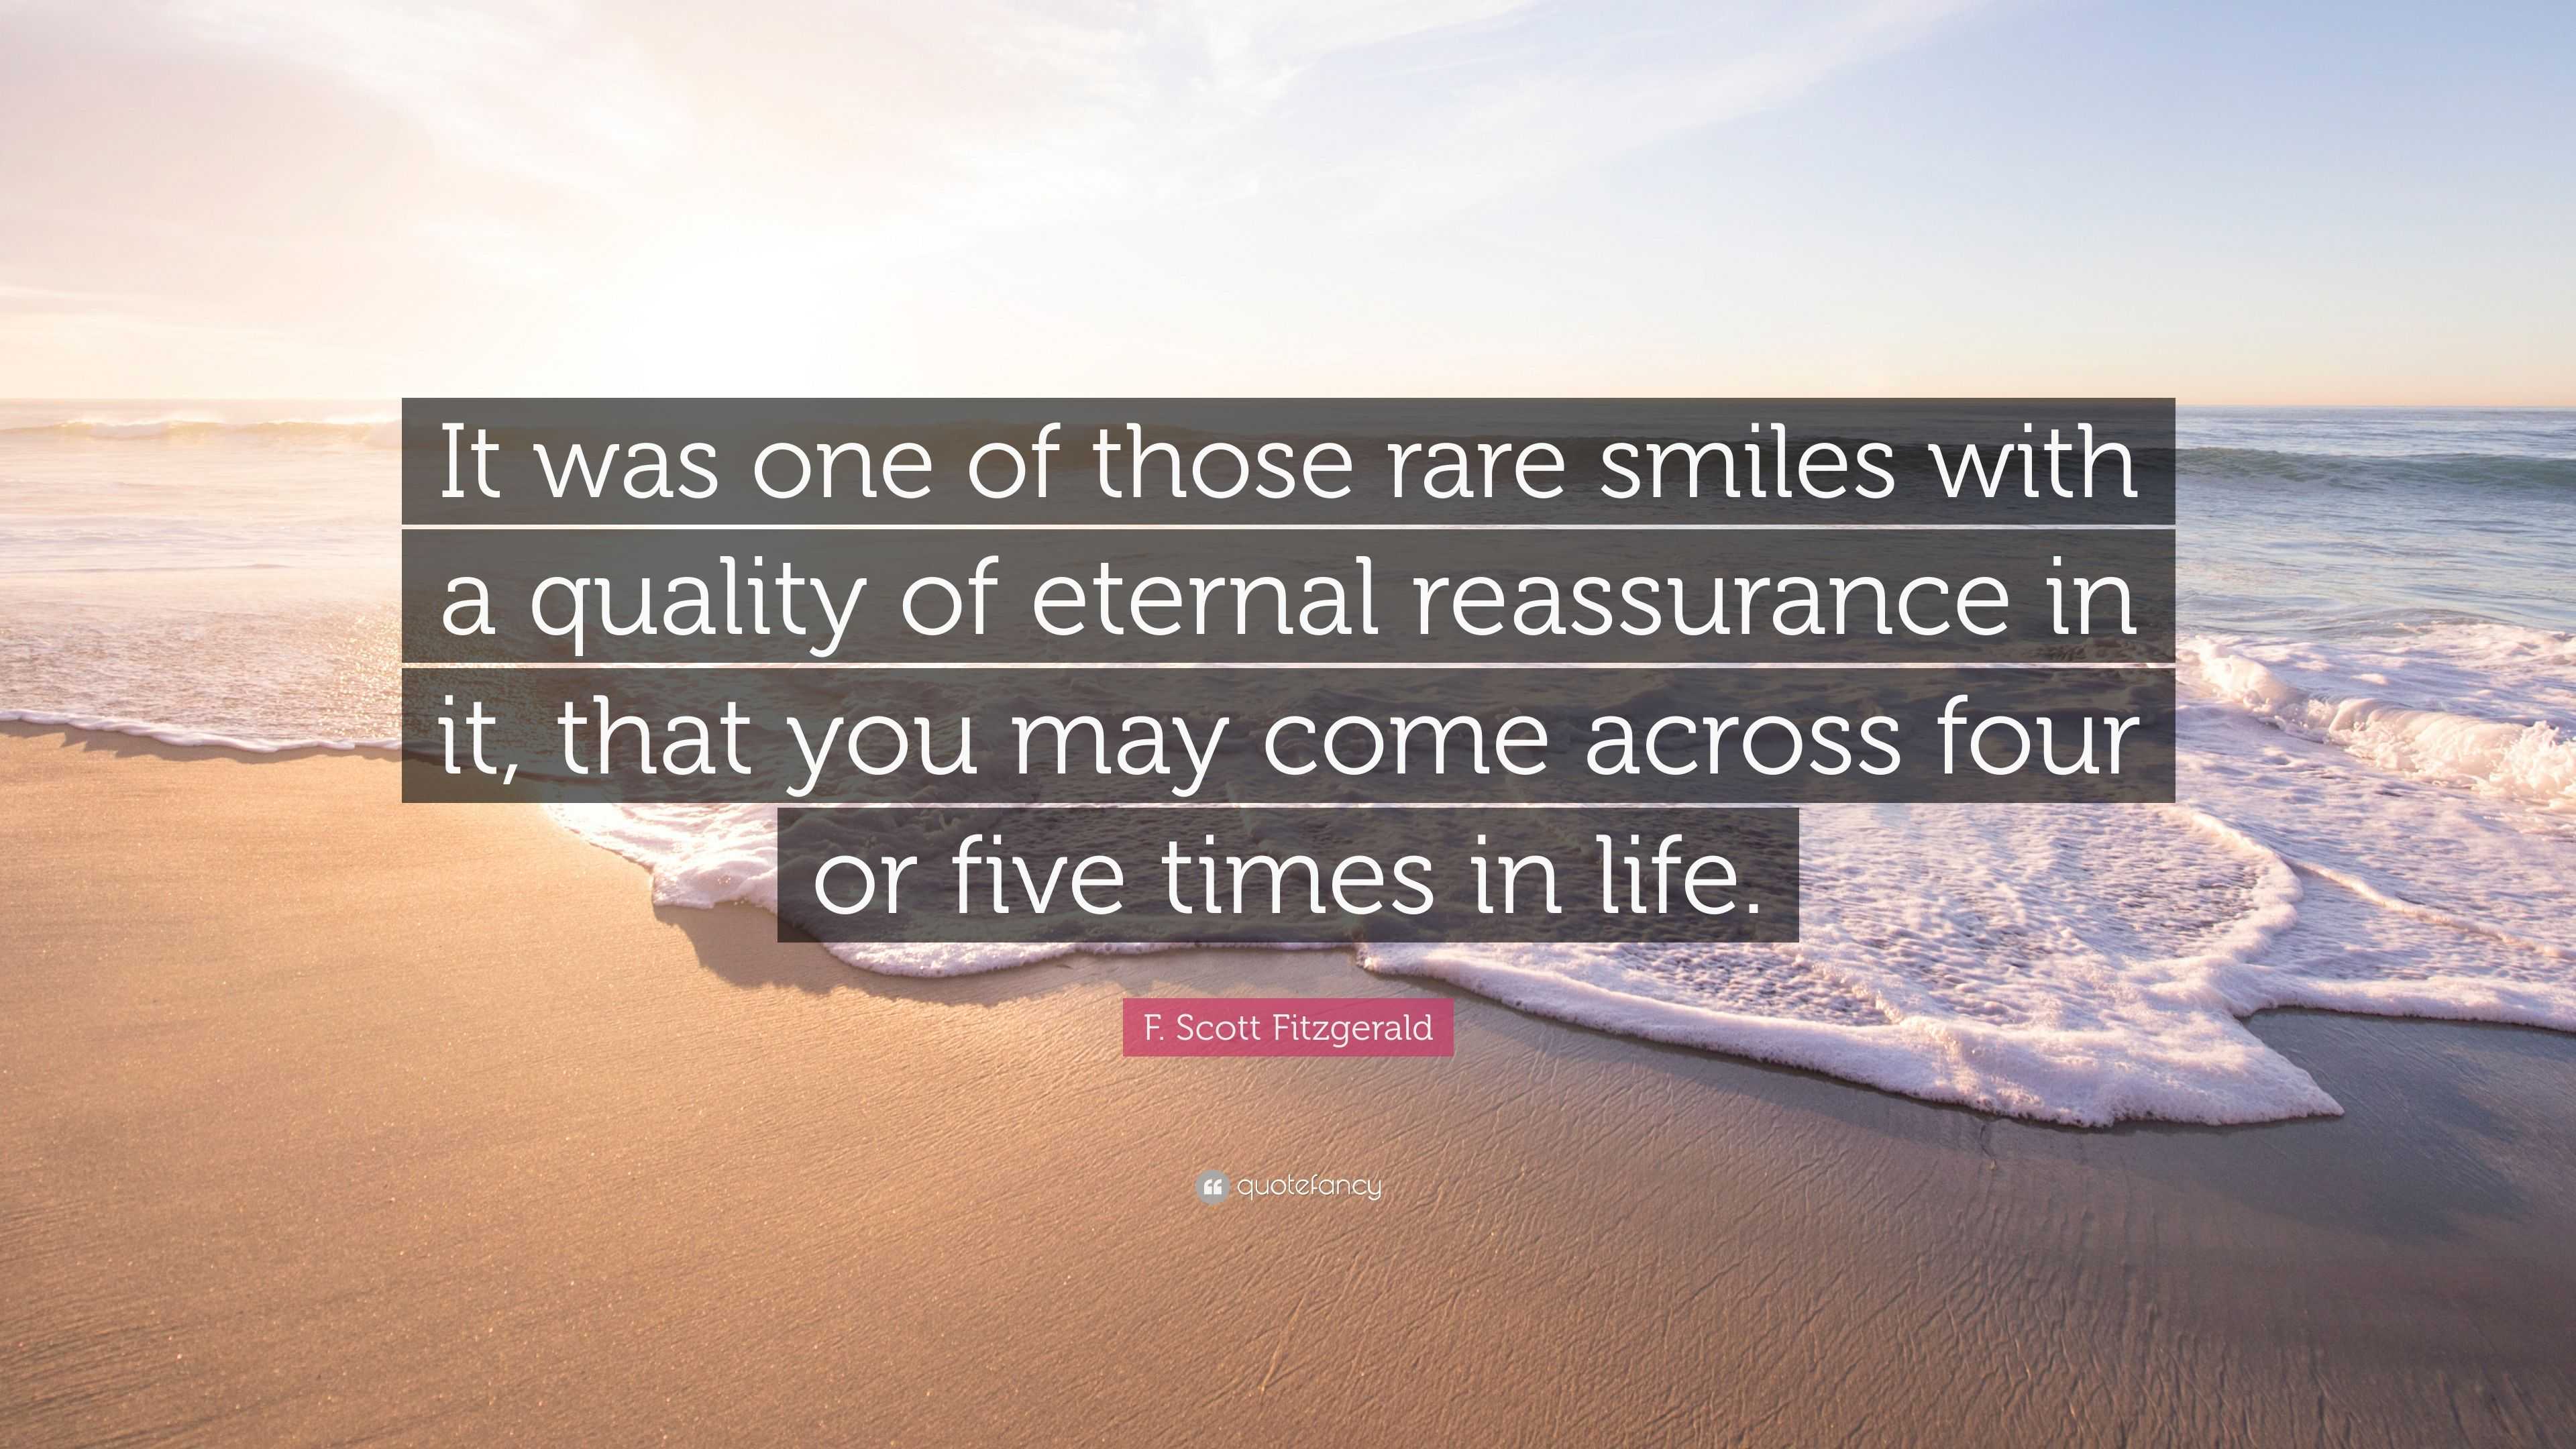 F Scott Fitzgerald Quote “it Was One Of Those Rare Smiles With A Quality Of Eternal